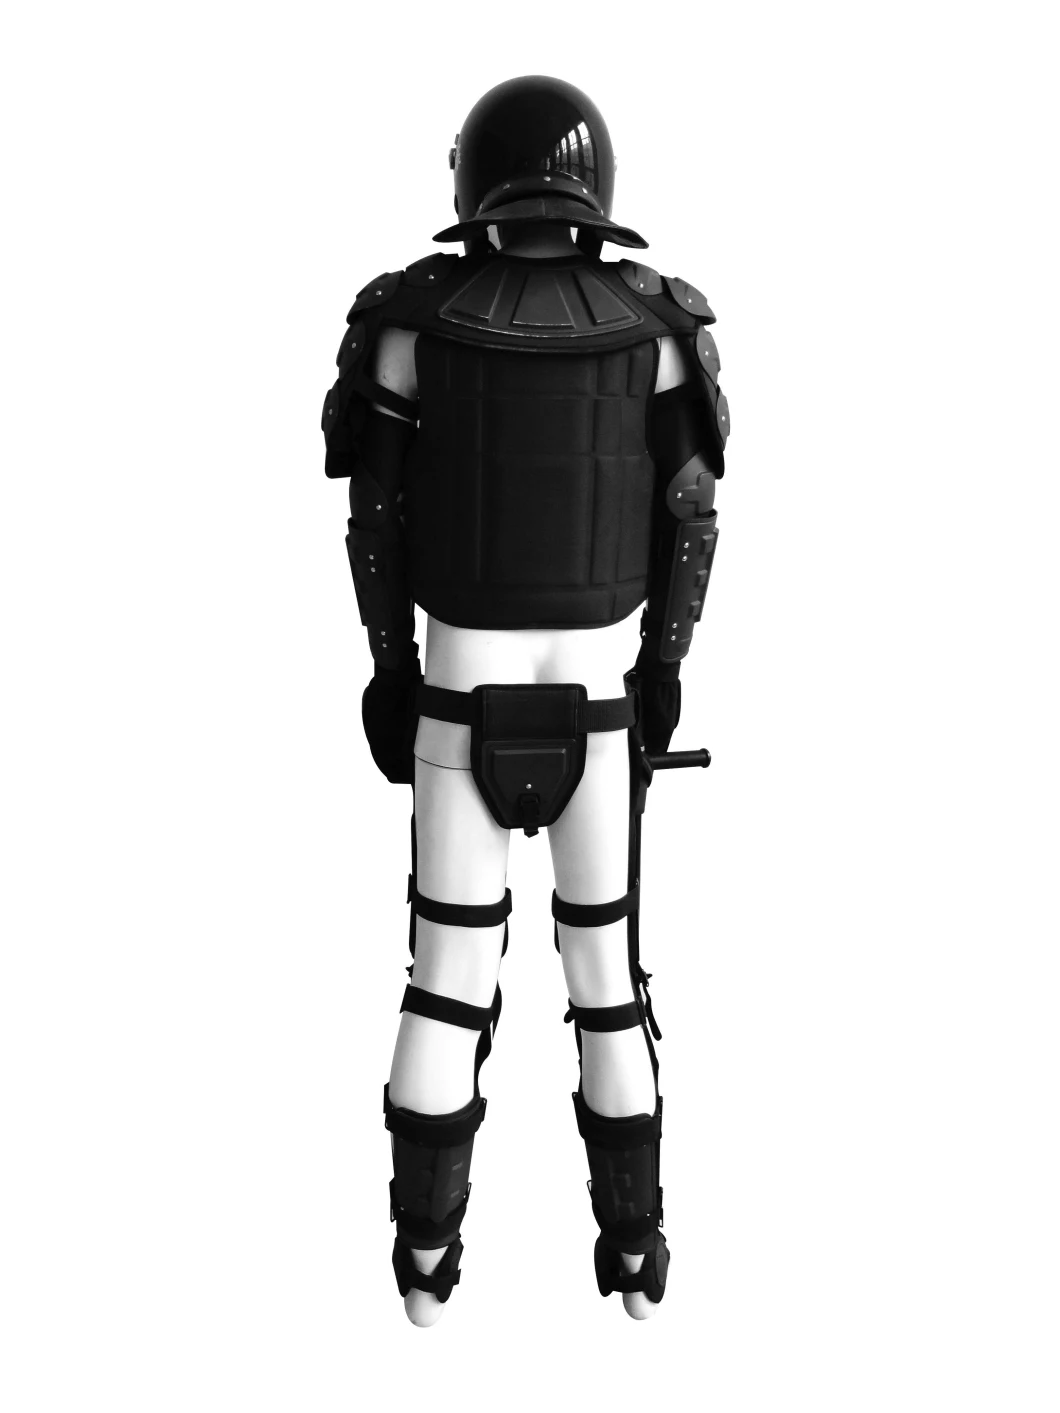 Tactical Anti Riot Suit/Body Protector with Fire Resistance